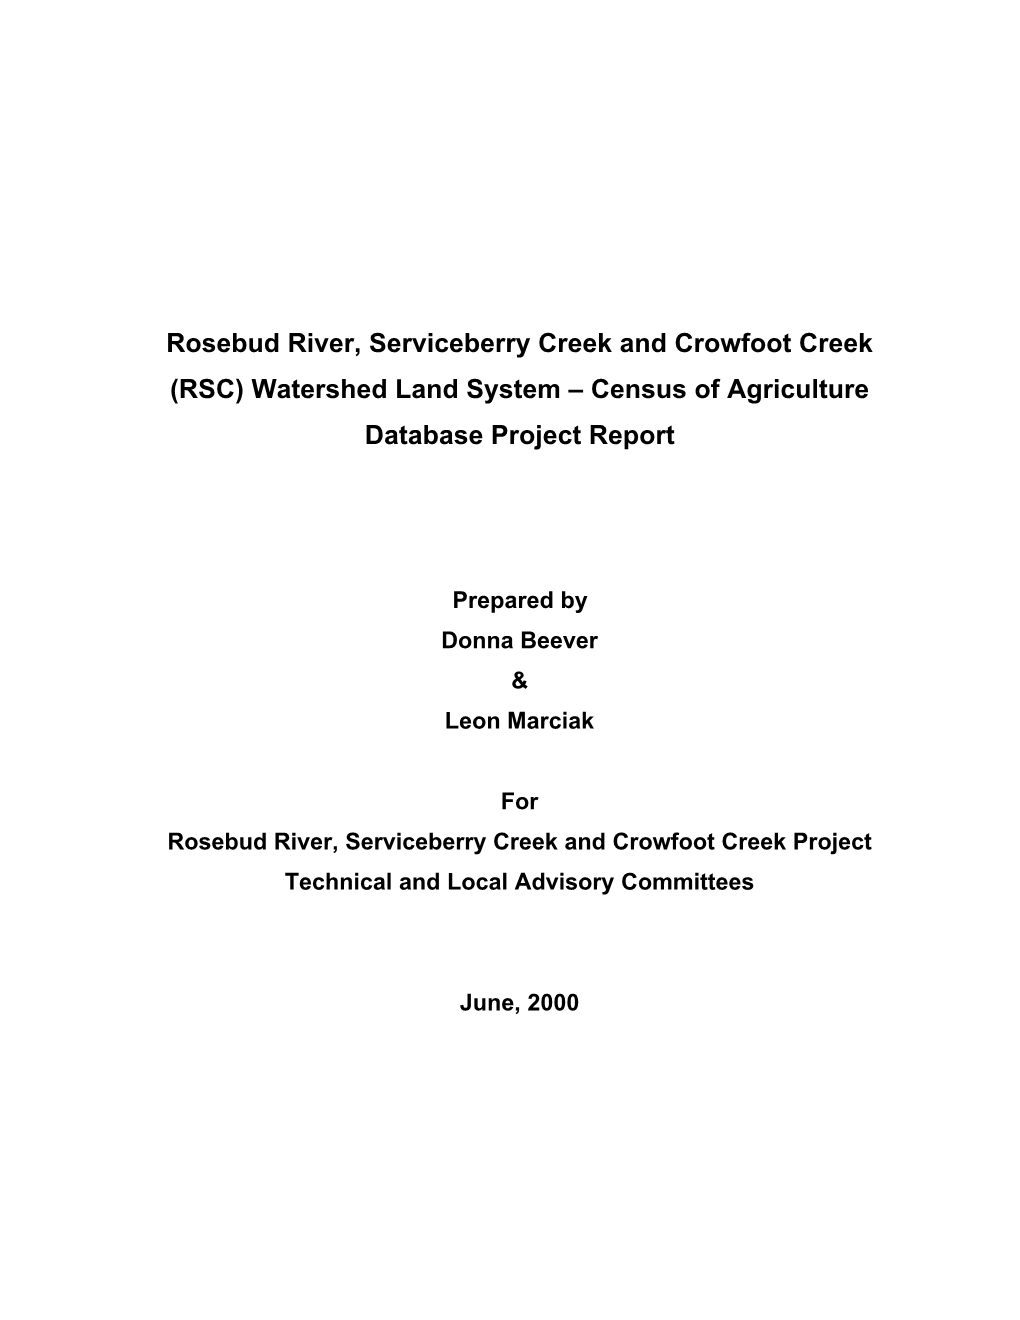 Rosebud River, Serviceberry Creek and Crowfoot Creek (RSC) Watershed Land System – Census of Agriculture Database Project Report